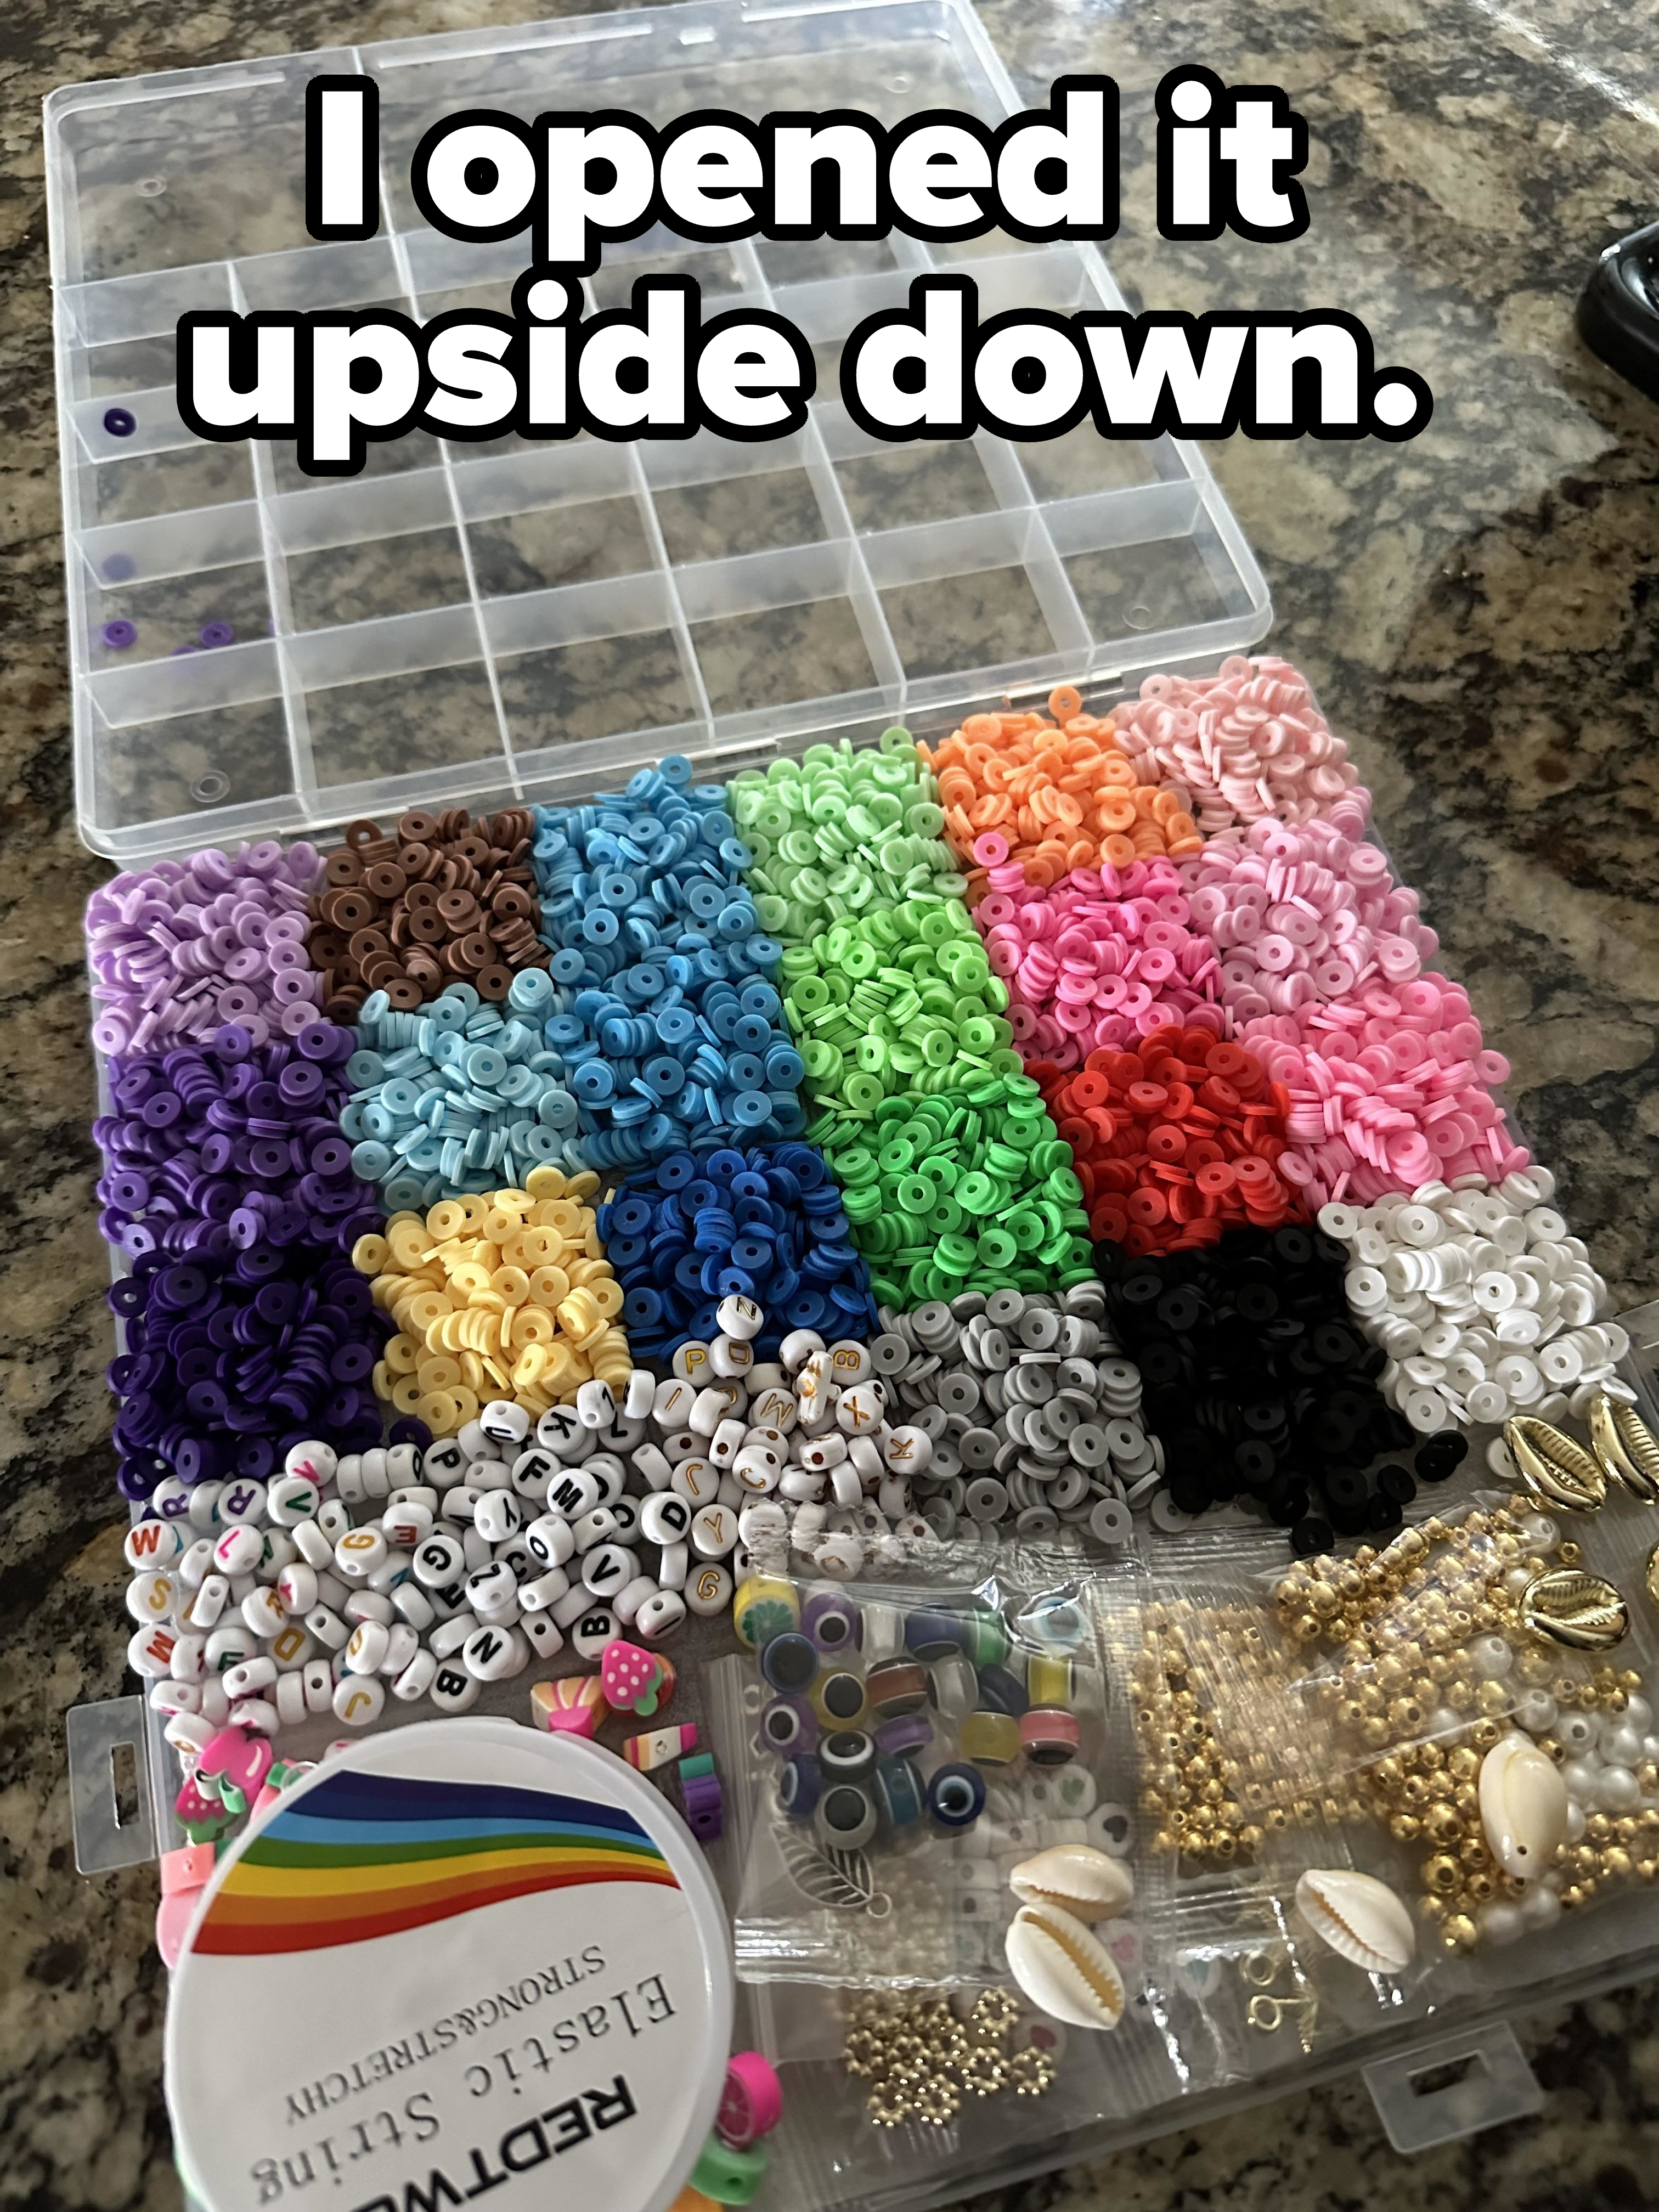 &quot;I opened it upside down&quot;: A plastic container with compartments containing all kinds of beads and baubles for making jewelry